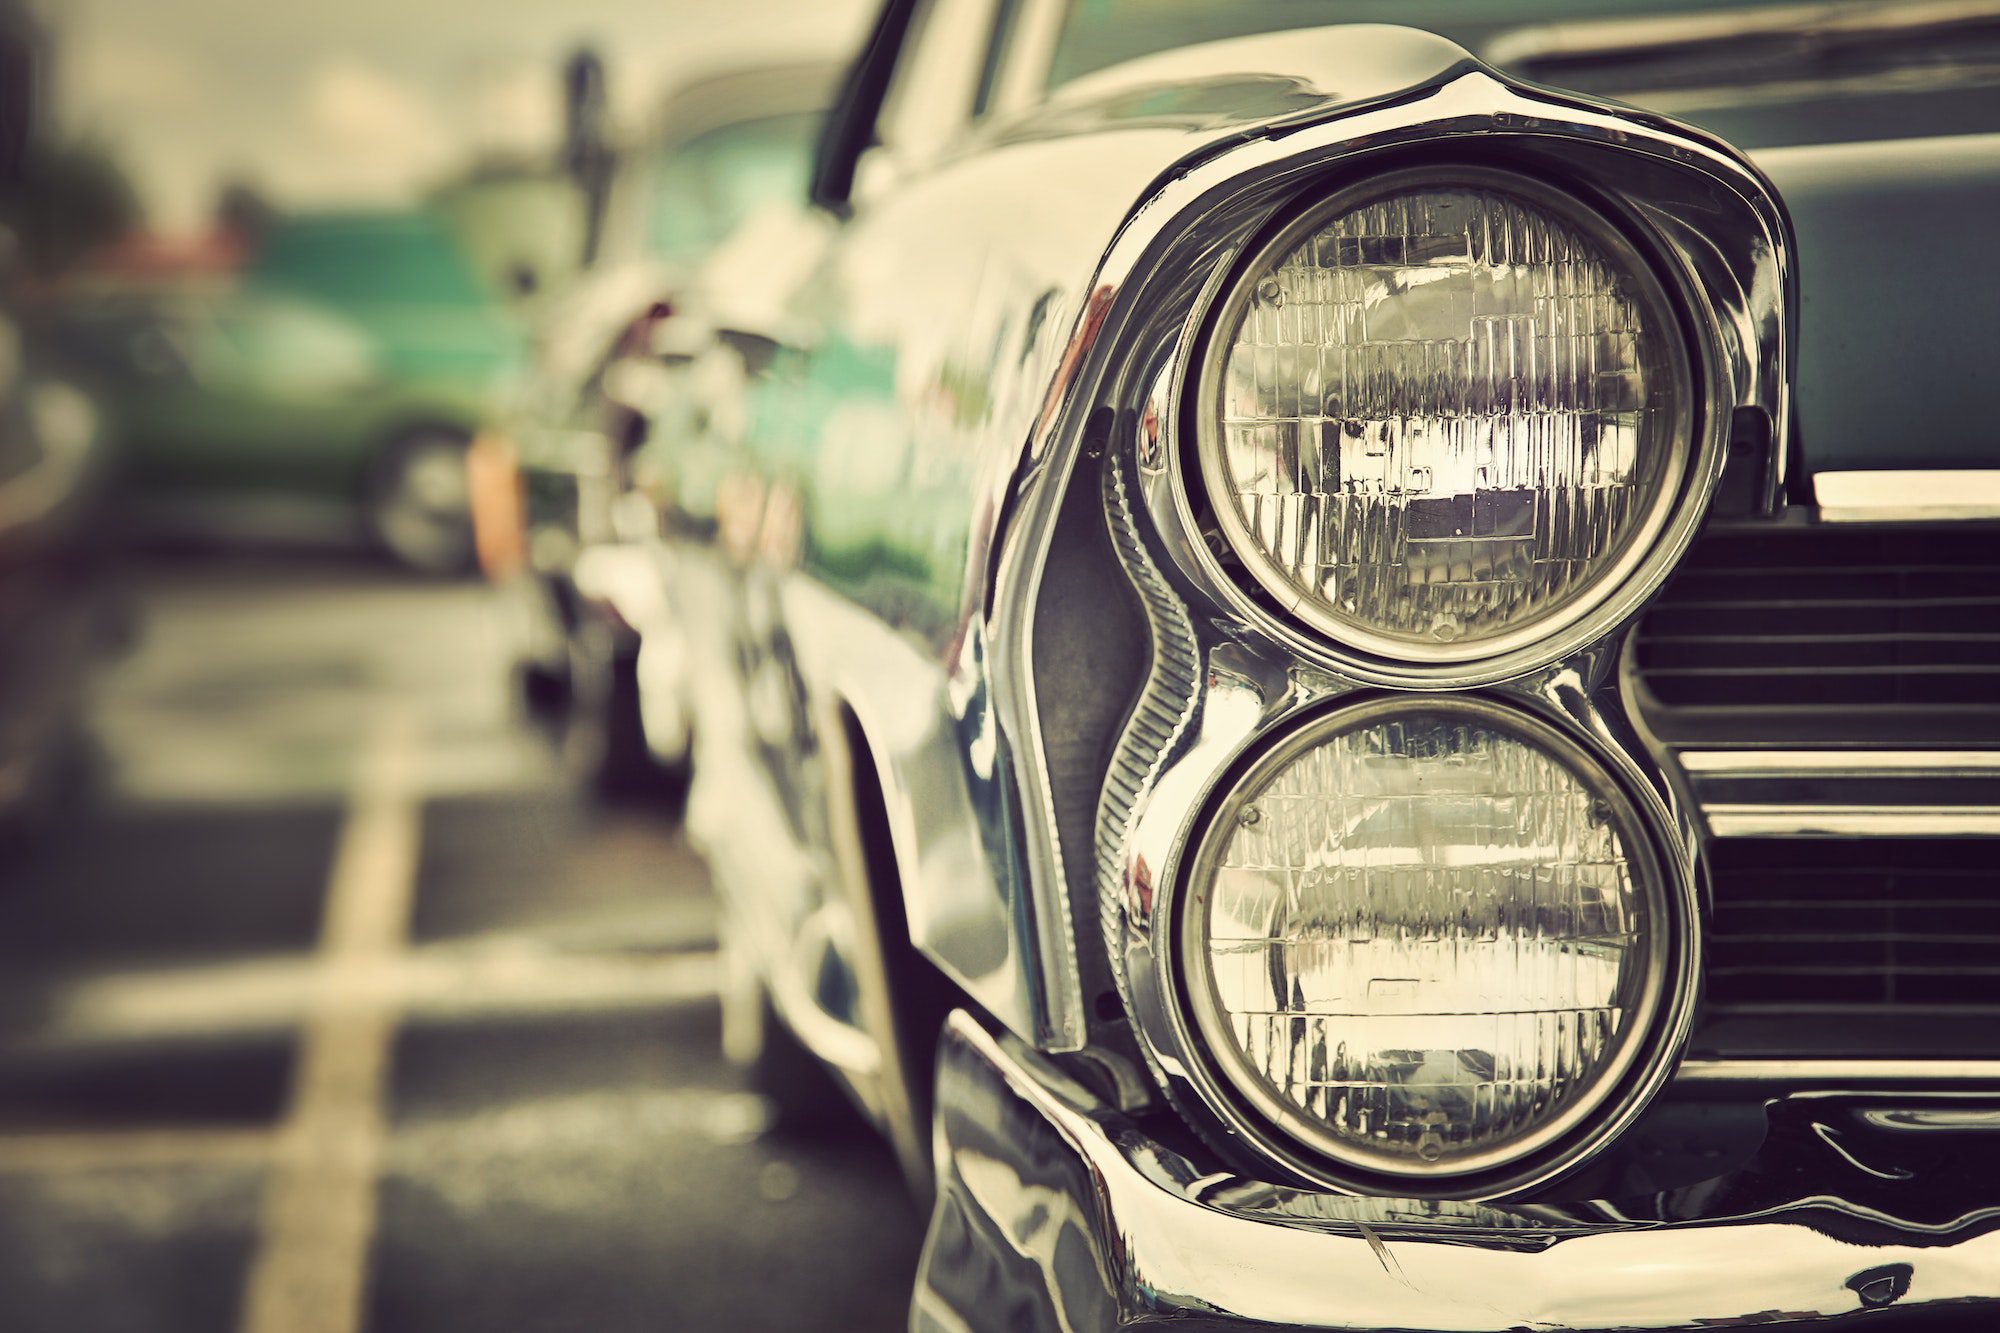 The history of car dealerships and how they have evolved over time.